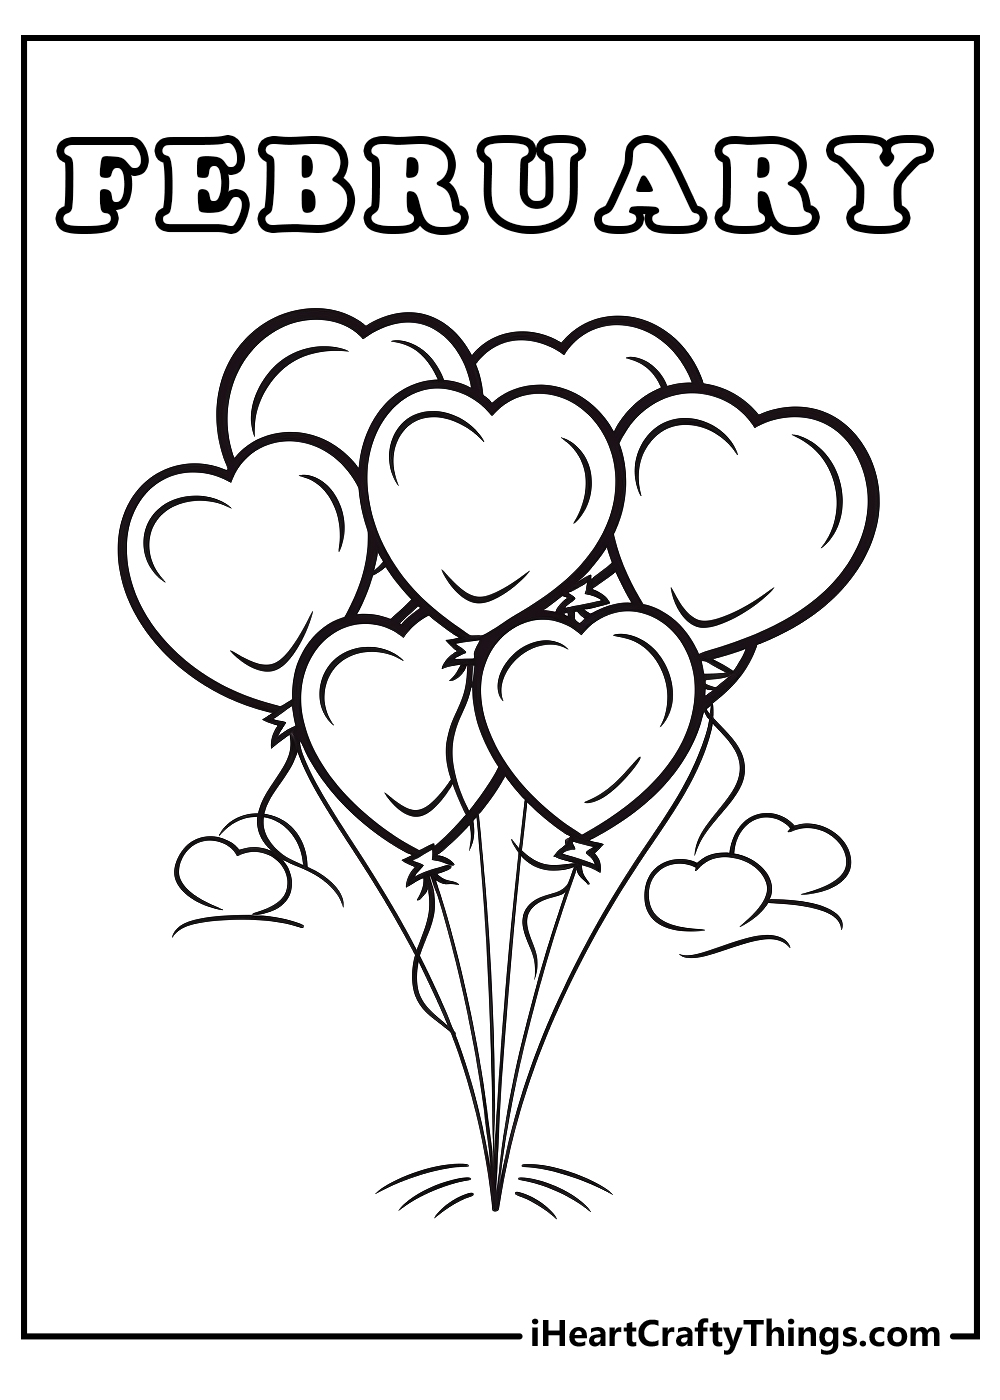 february black-and-white coloring printable